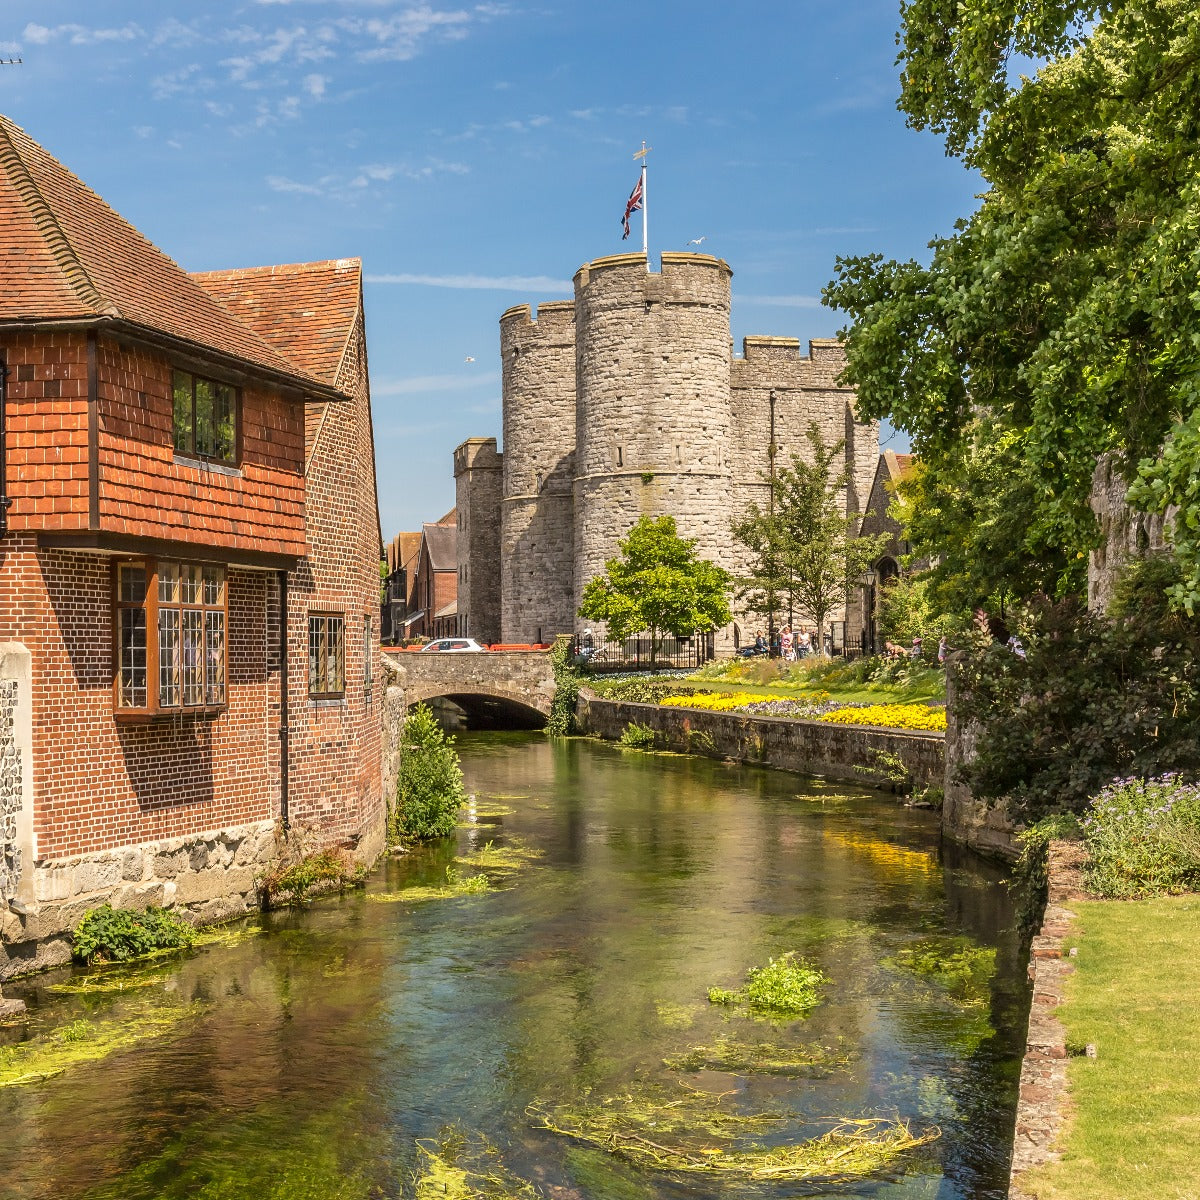 The castle and river in Canterbury